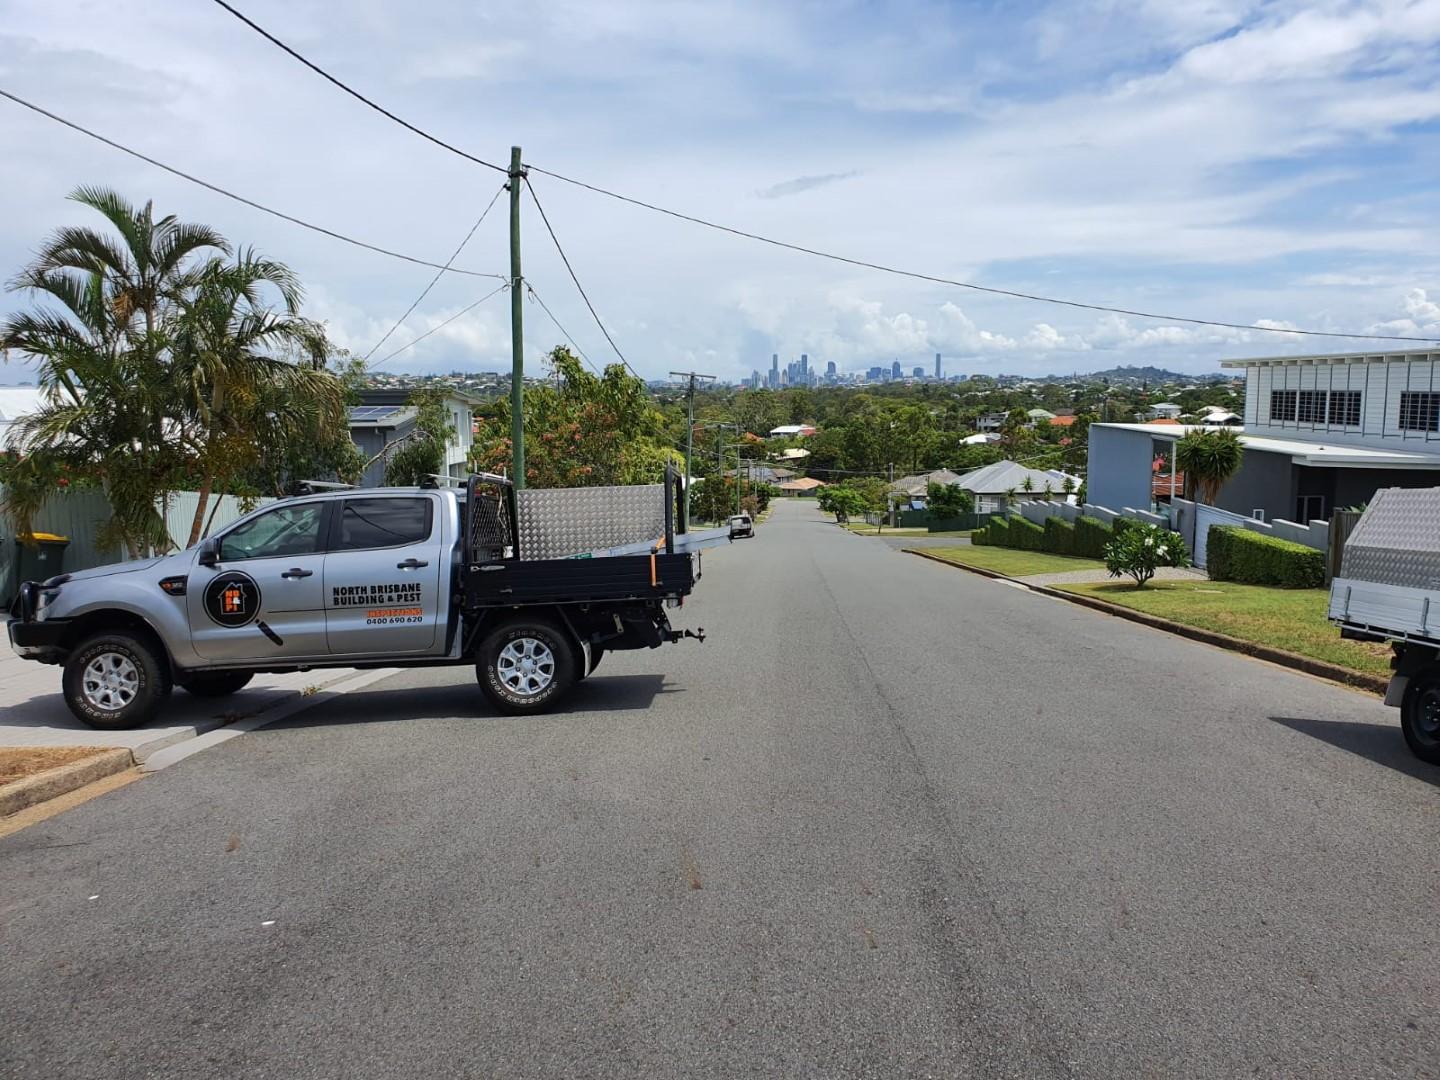 Brett's Building inspection Ute on the driveway of a building inspection house with views of Brisbane CBD in the background